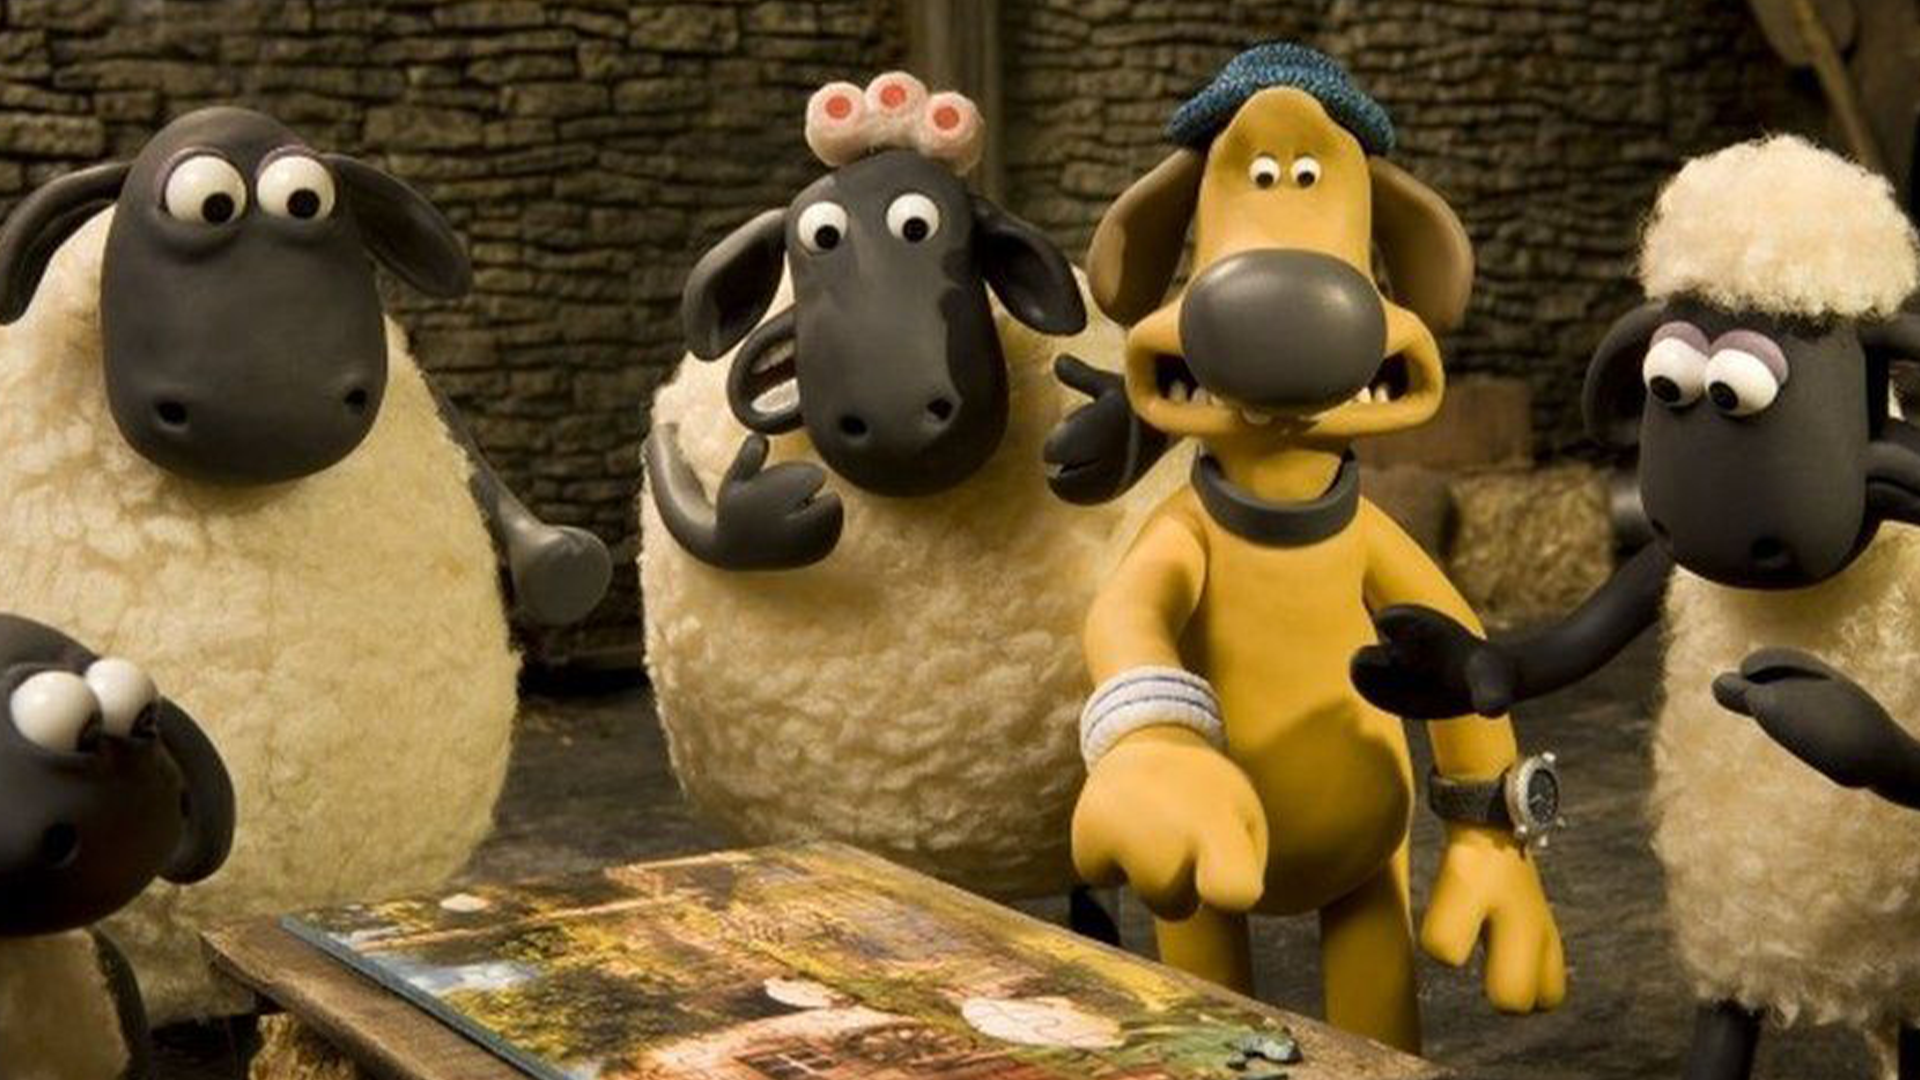 Shaun and friends